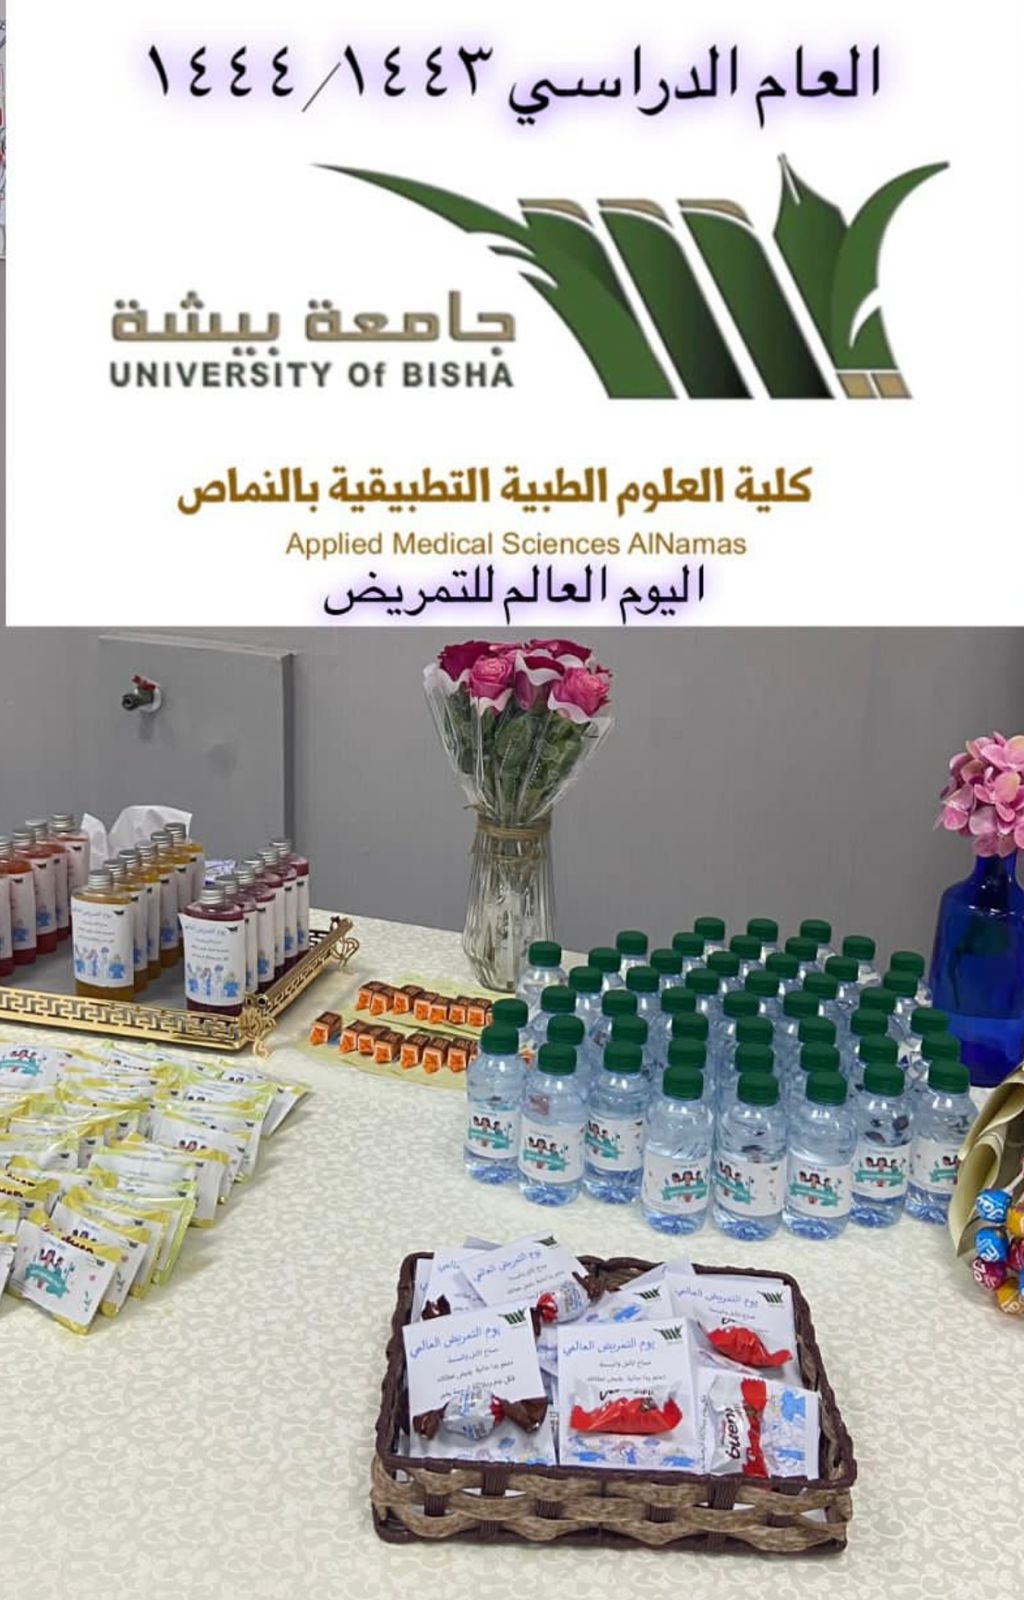 The College of Applied Medical Sciences in Al-Namas participates in the celebration of the International Nursing Day